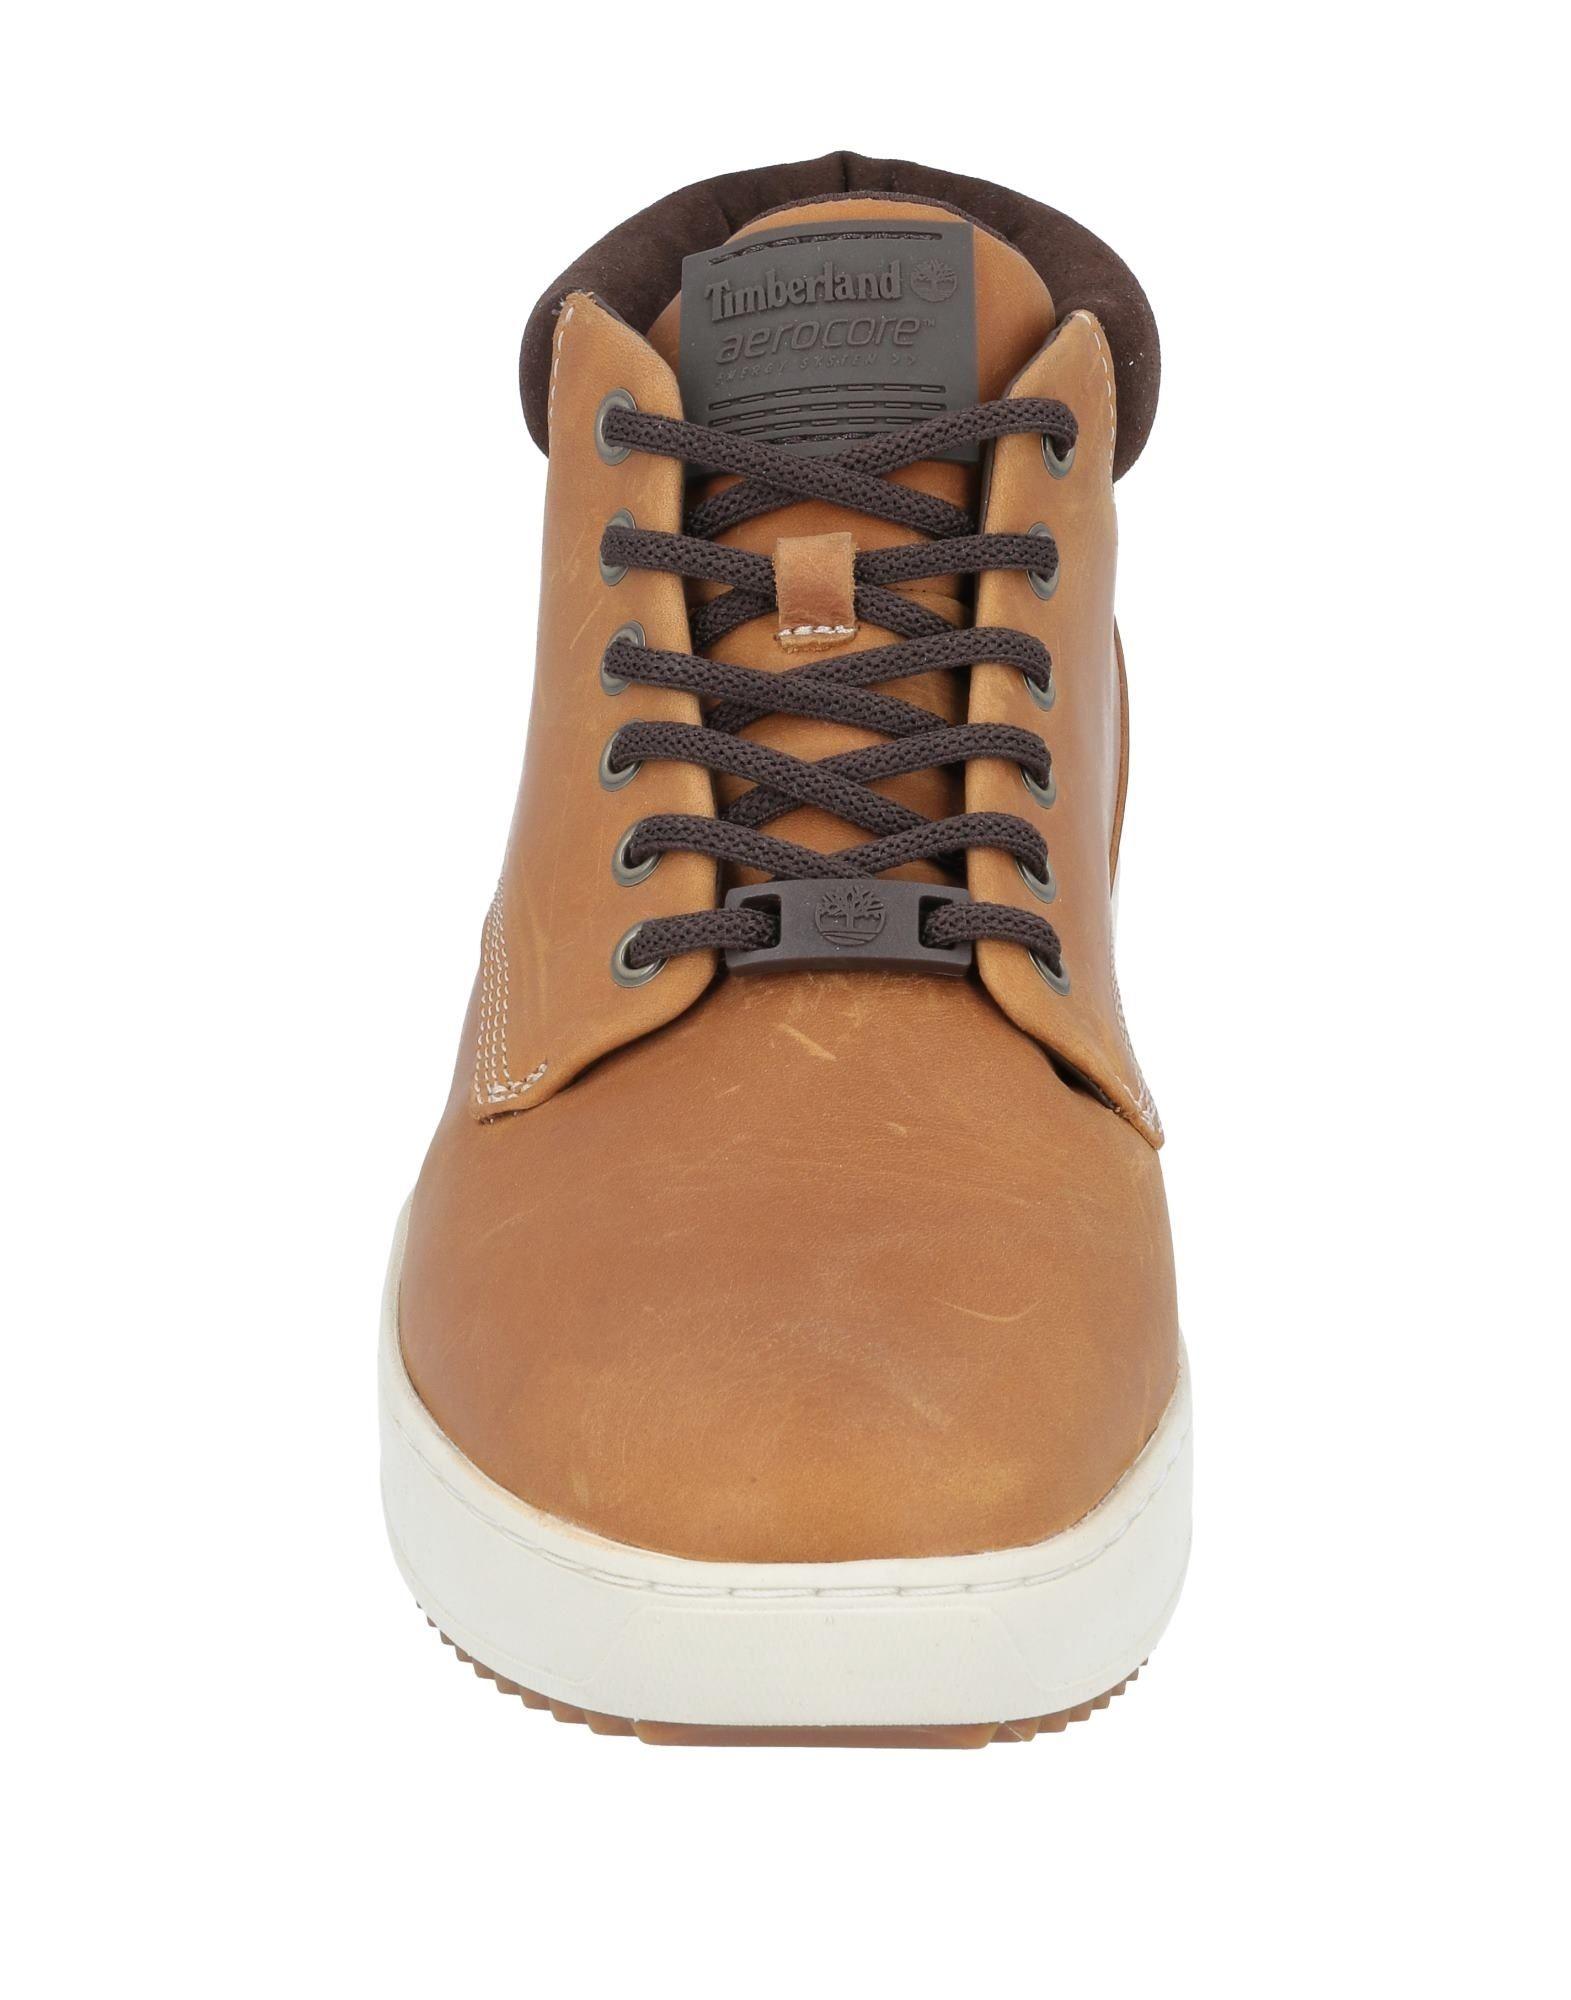 Timberland Synthetic Ankle Boots in Camel (Brown) for Men - Lyst